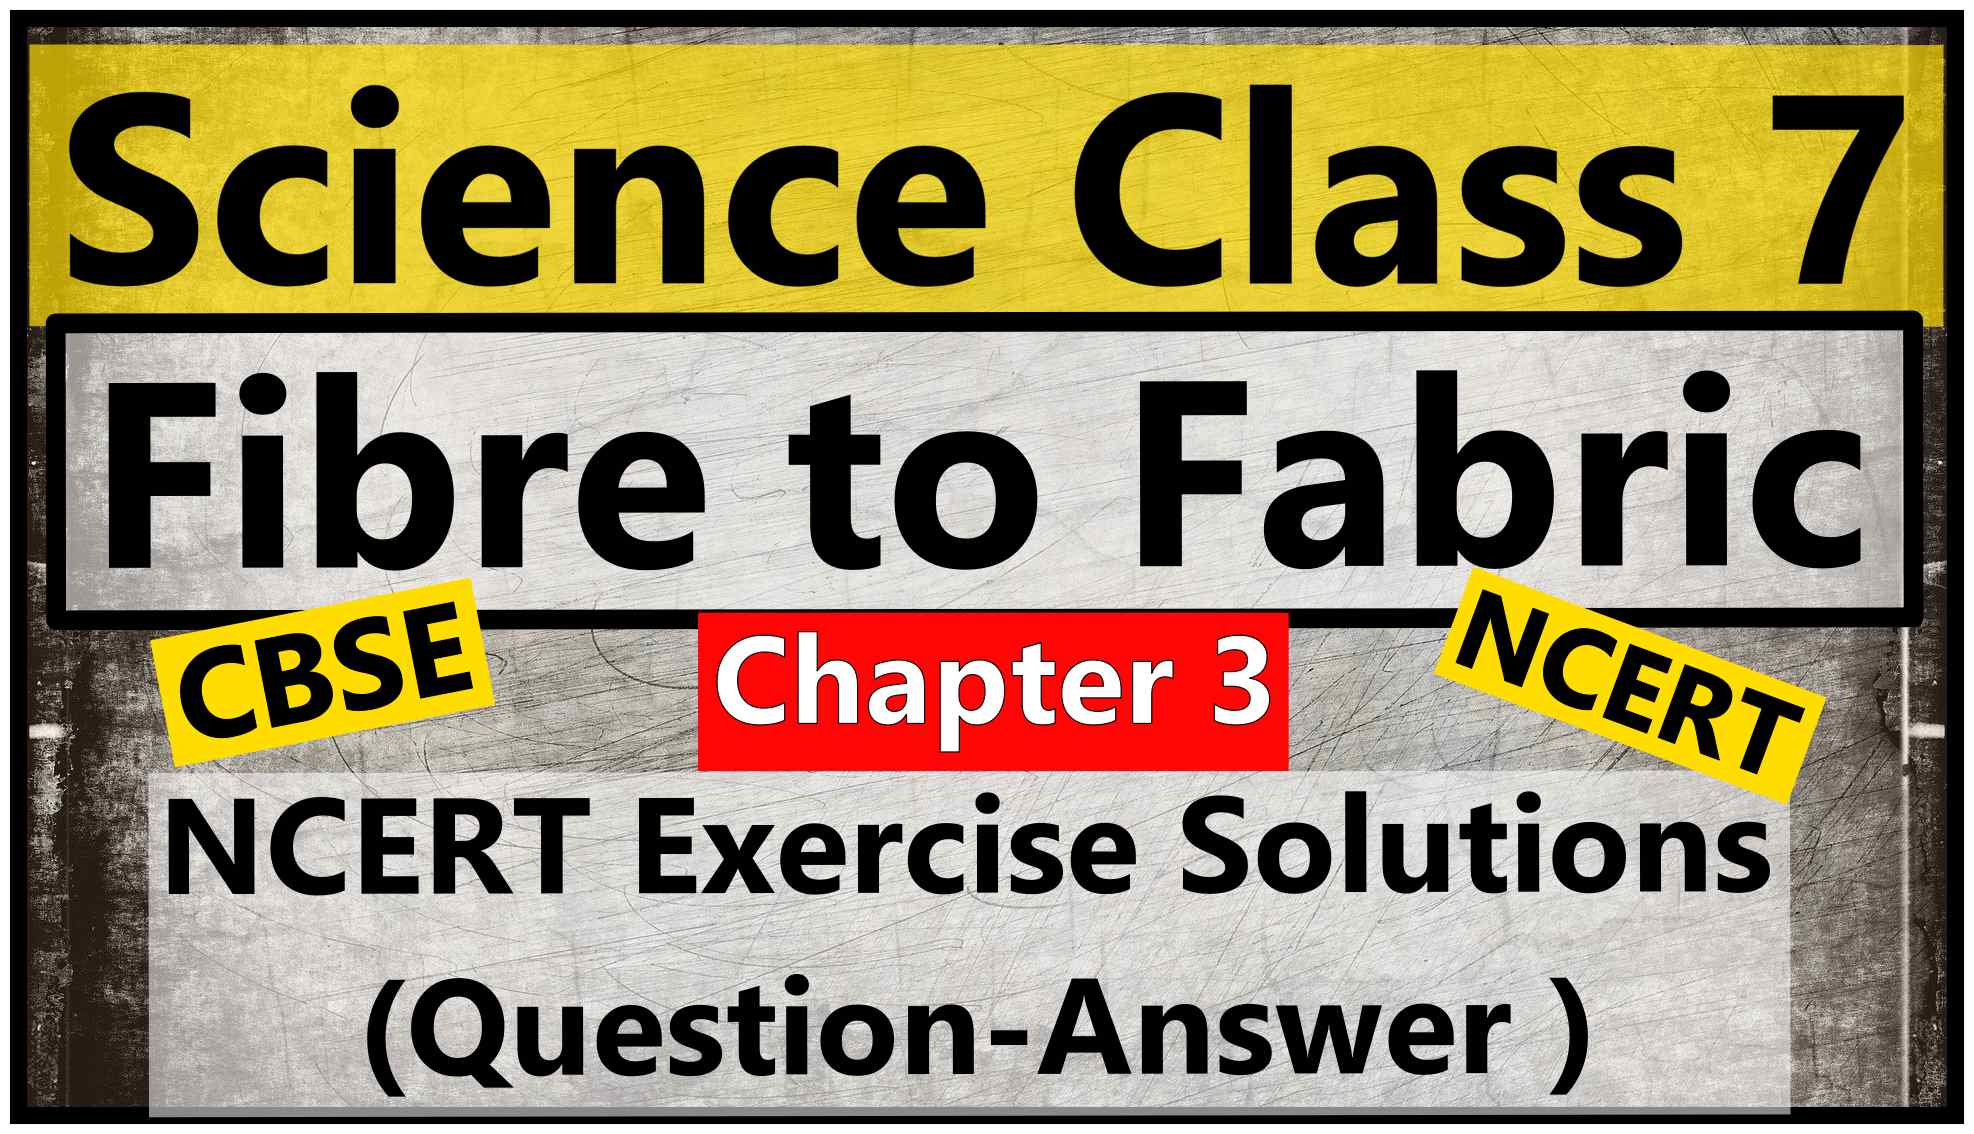 Science Class 7- Chapter 3- Fibre to Fabric- NCERT Exercise Solution (Question-Answer )